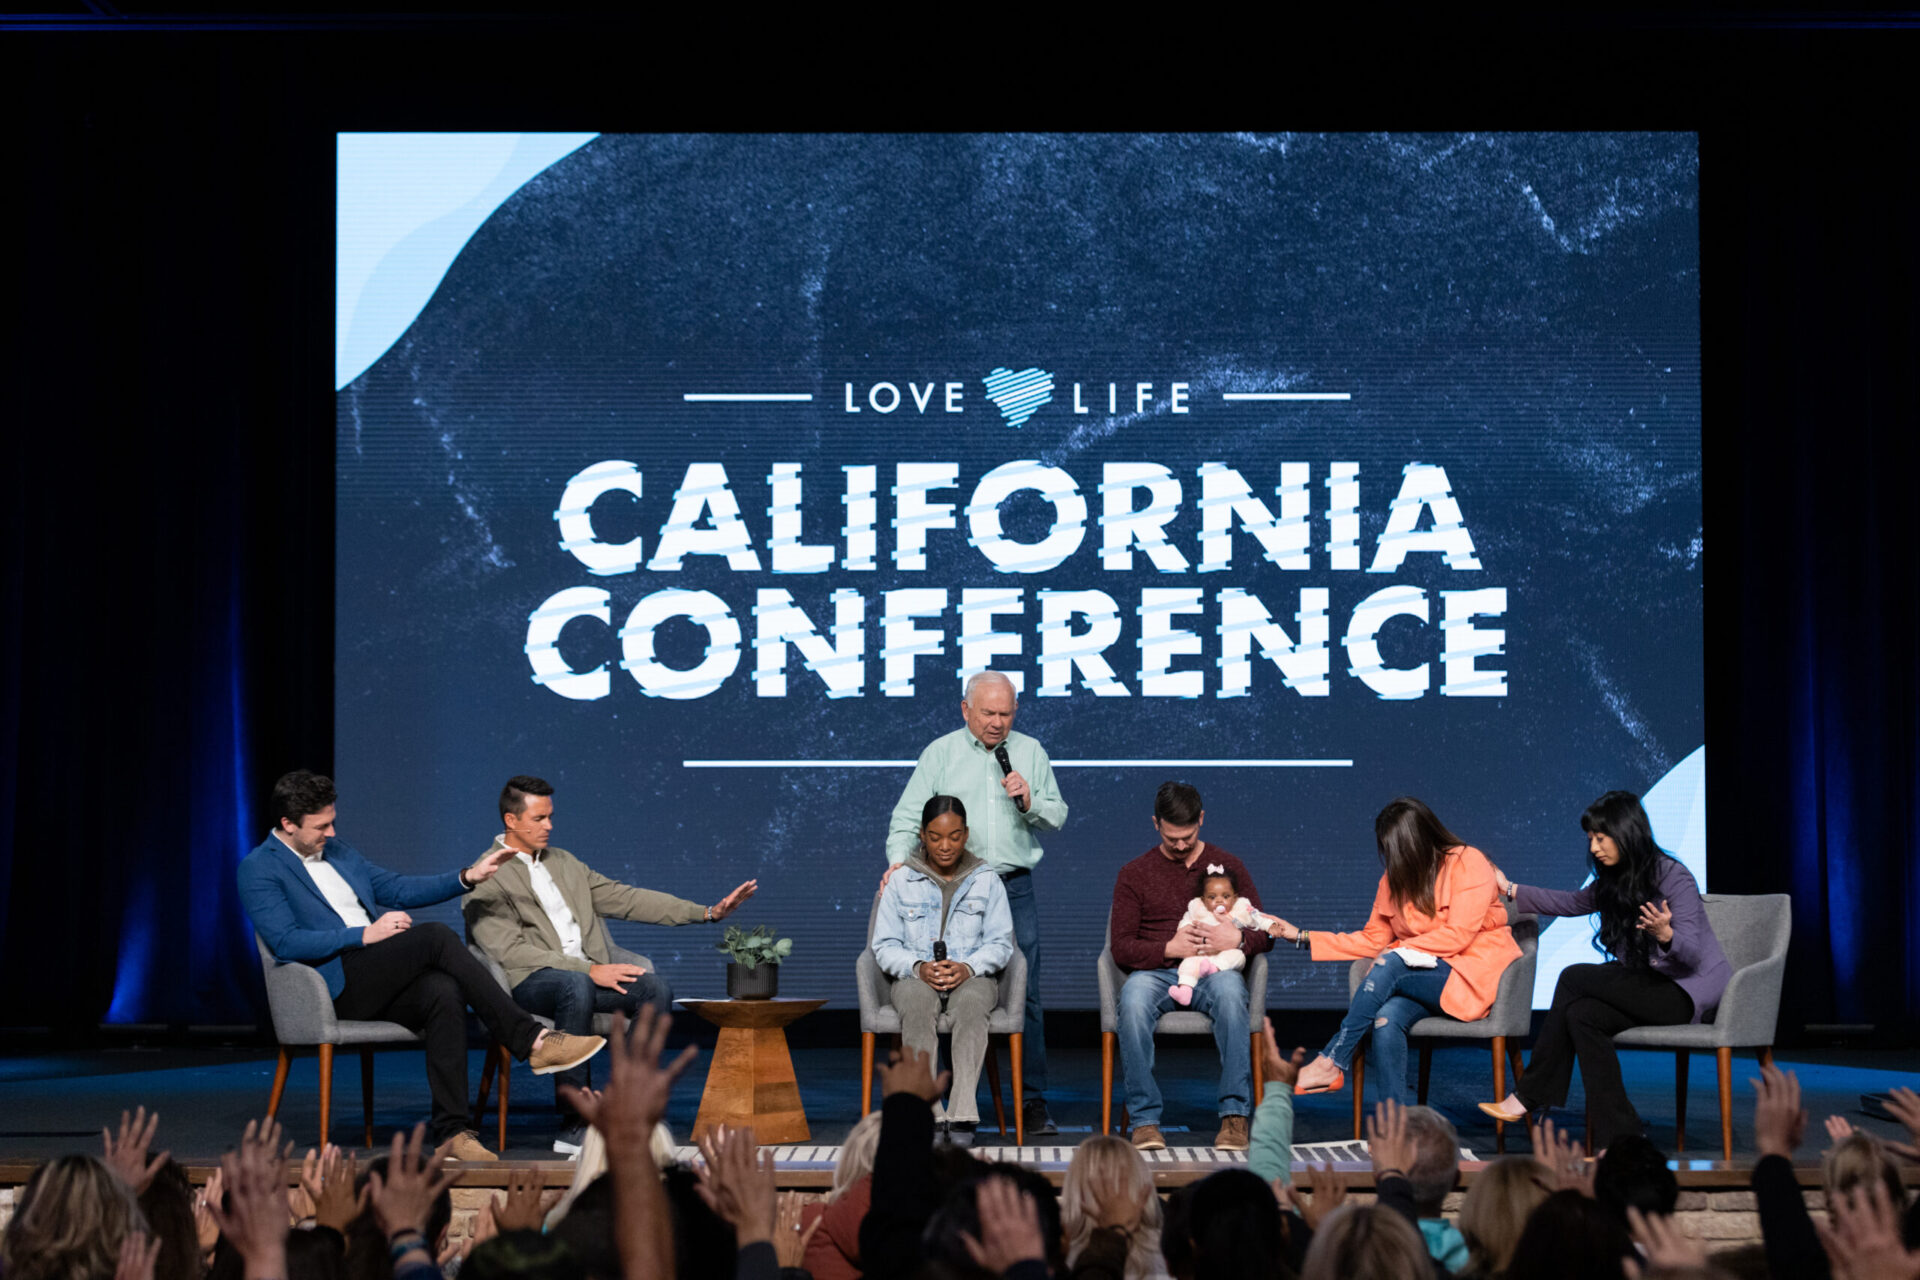 You are currently viewing Love Life California Conference Takeaways – by Sarah Boeke